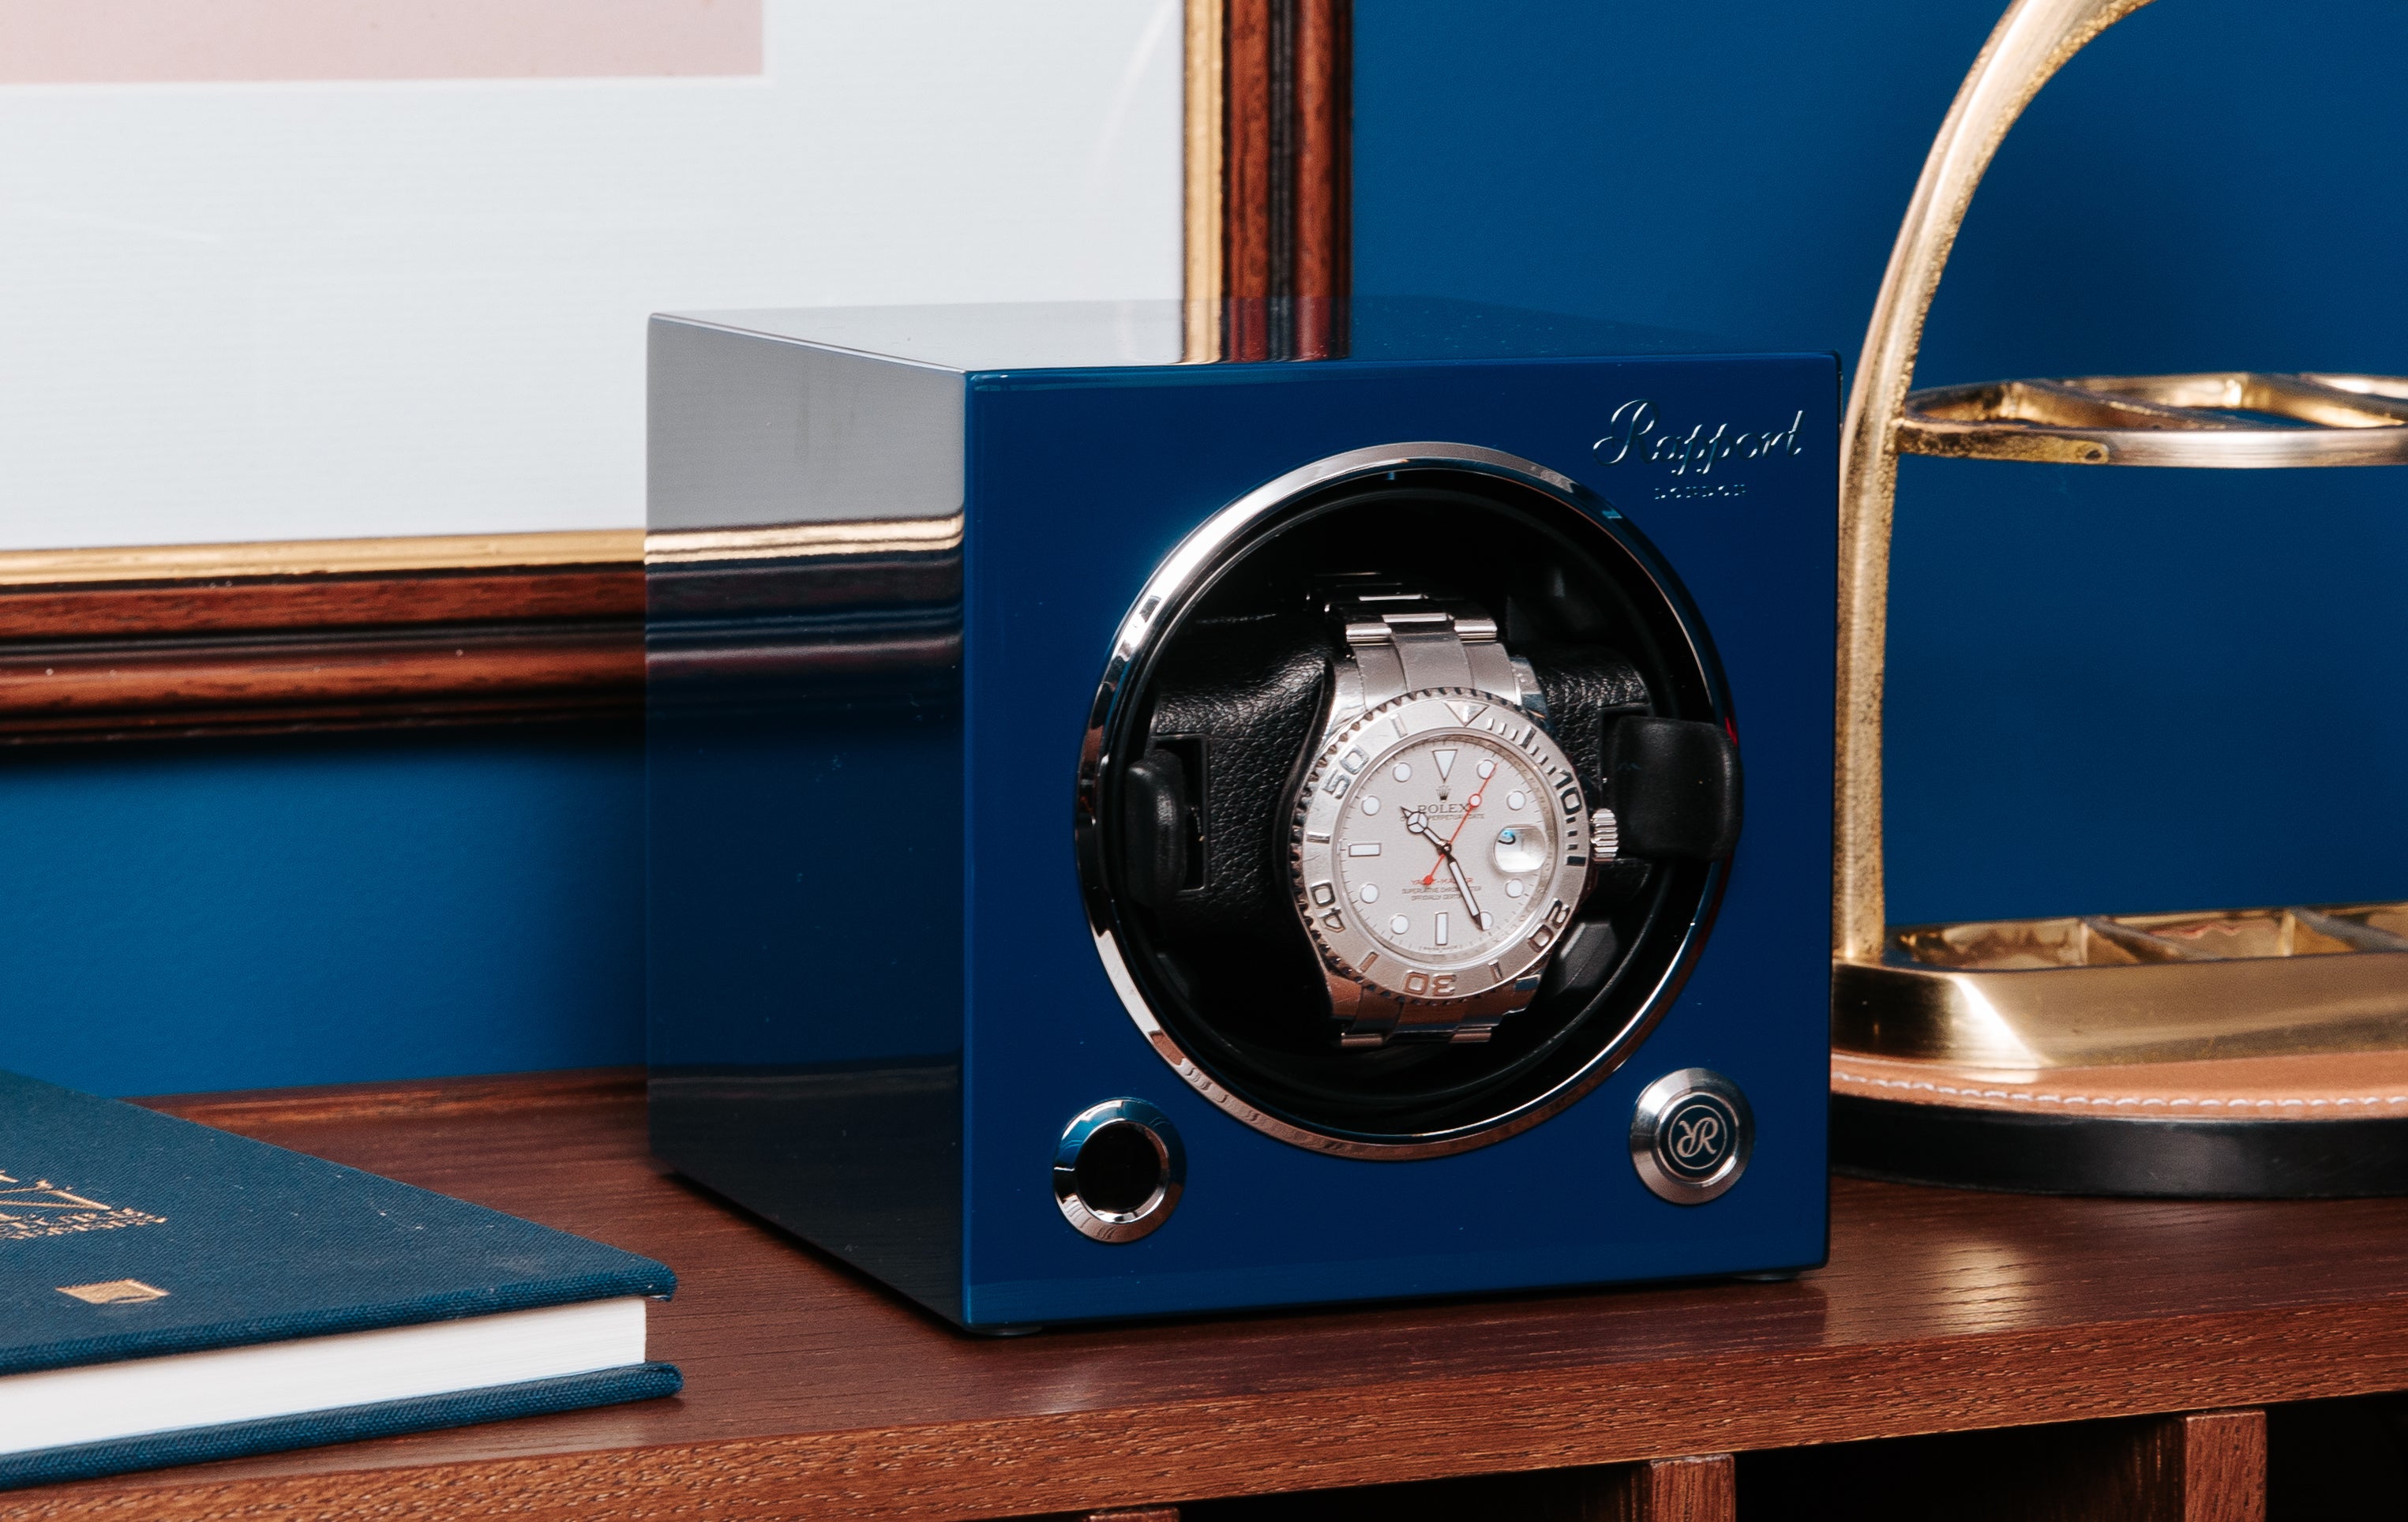 Article: Tips for Gifting a Rapport Watch Winder